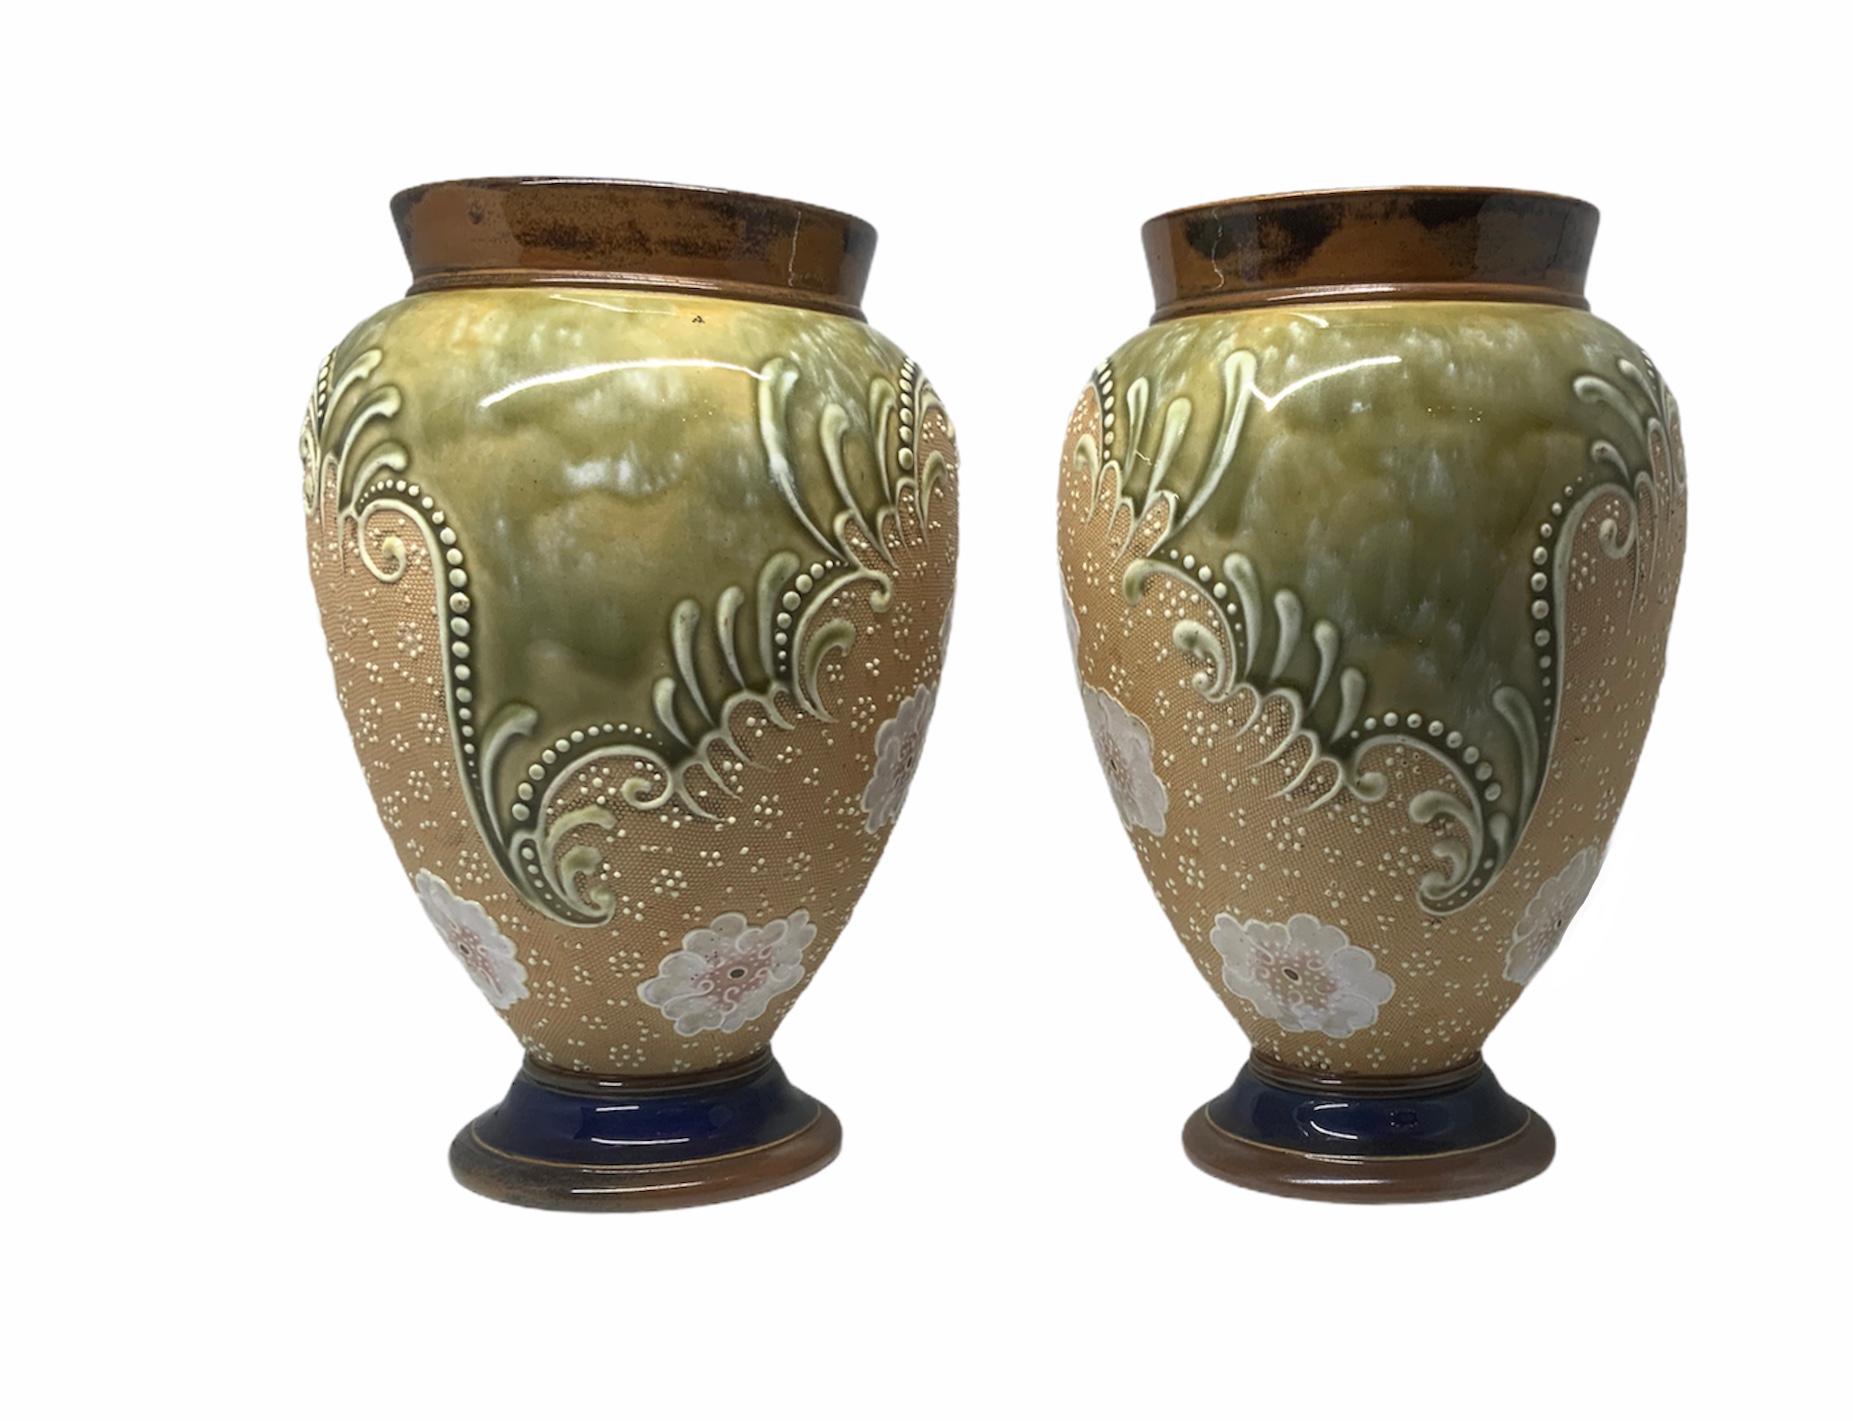 These are a pair of Doulton and Slater hand painted stoneware Amphora shaped vases. Their background is a combination of brown, green and, beige colors. They are adorned with a group of white flowers, dots all around, and framed by scrolls. Below